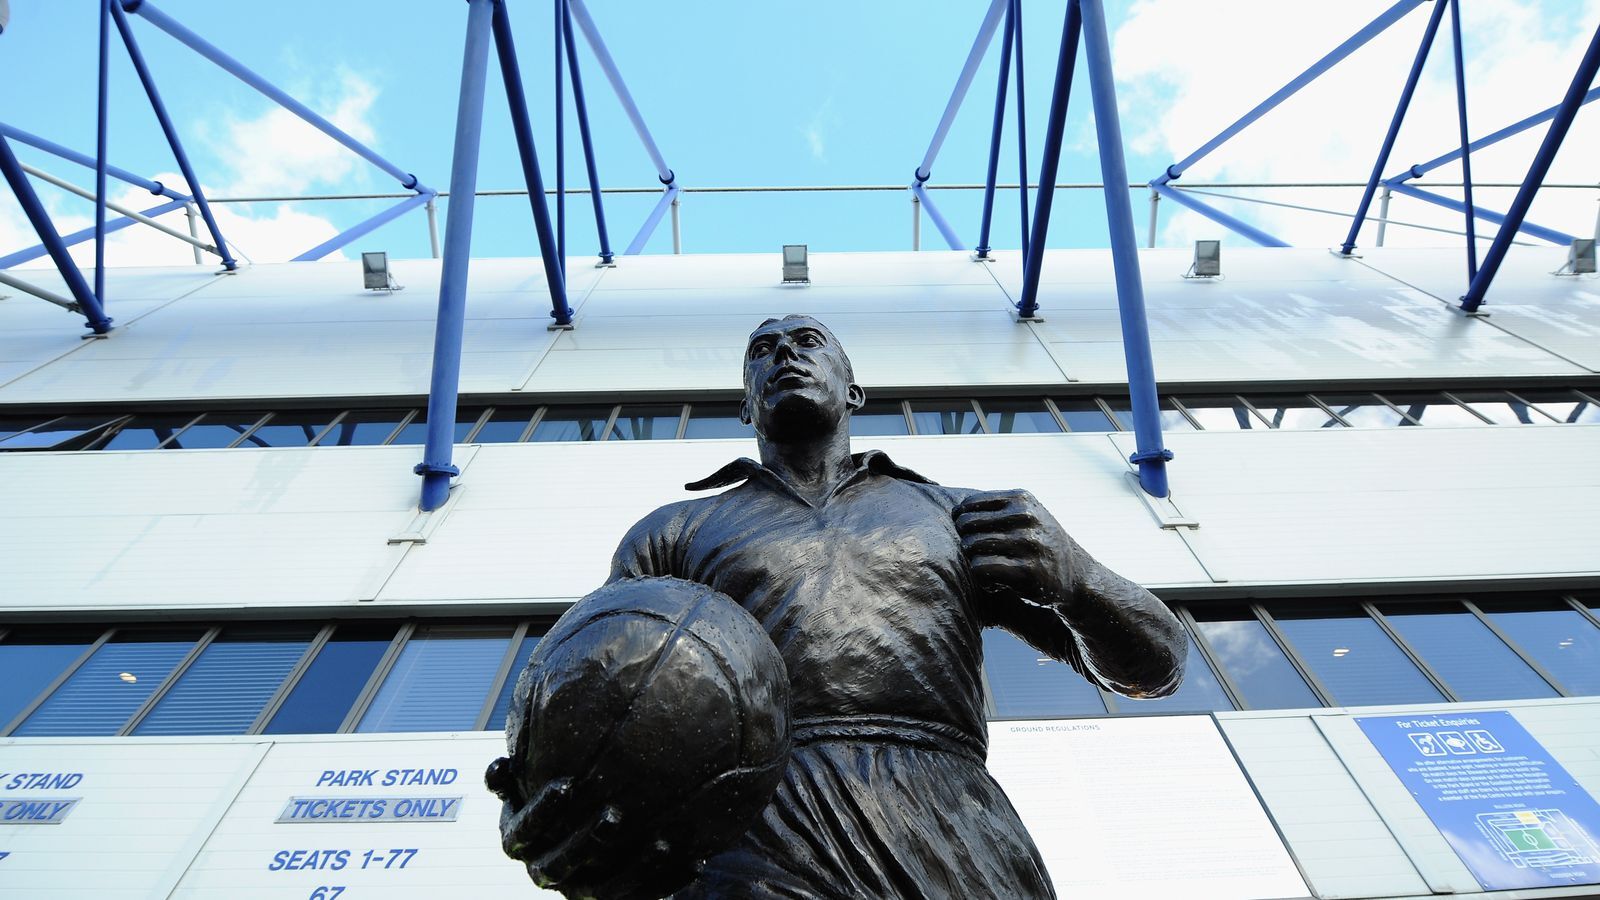 Everton Legend’s Monument Vandalized with Investigation Ongoing